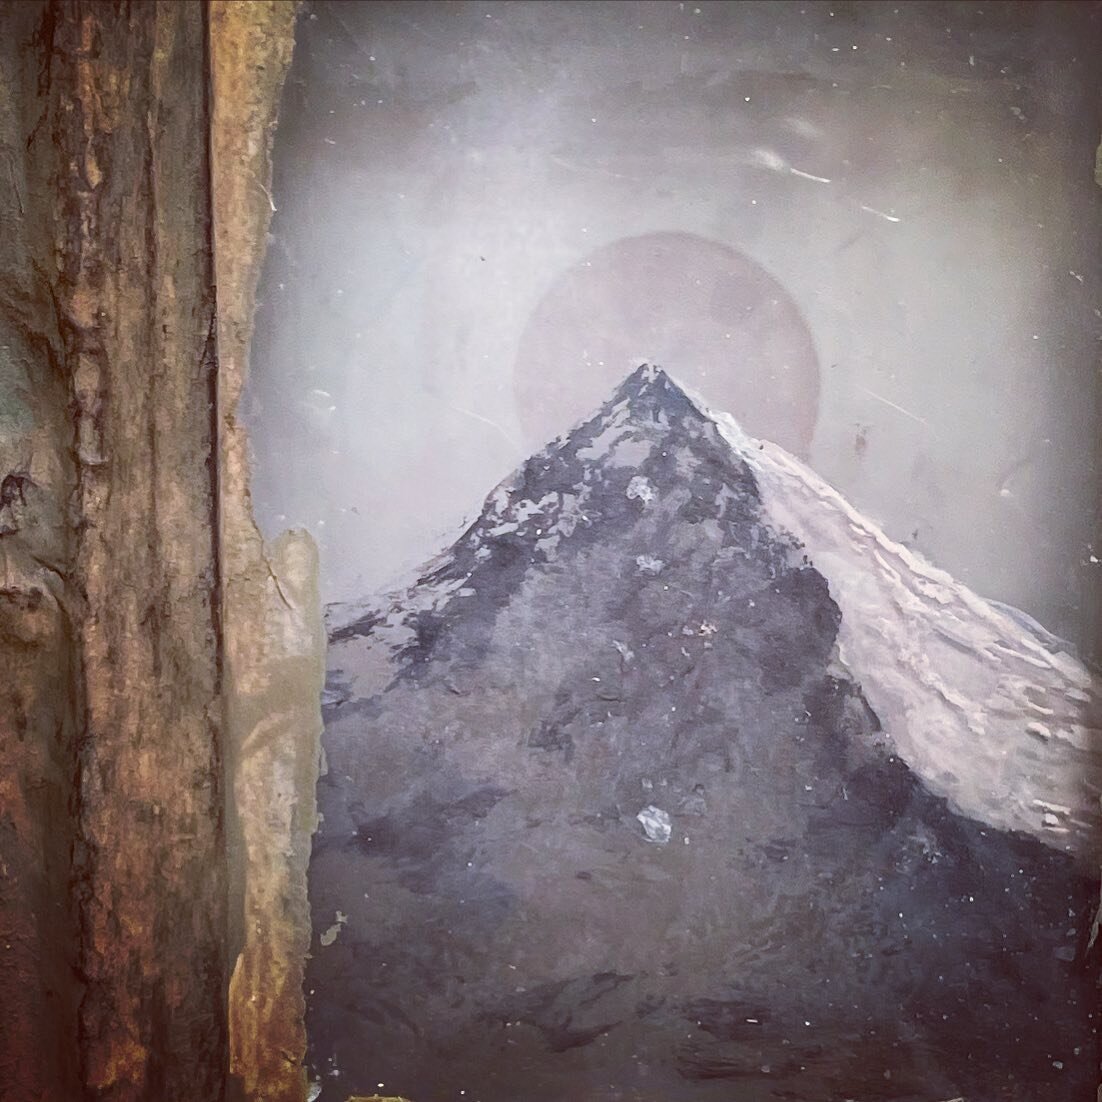 Inspiration by 墨白

#art #gallery #nature #mountain